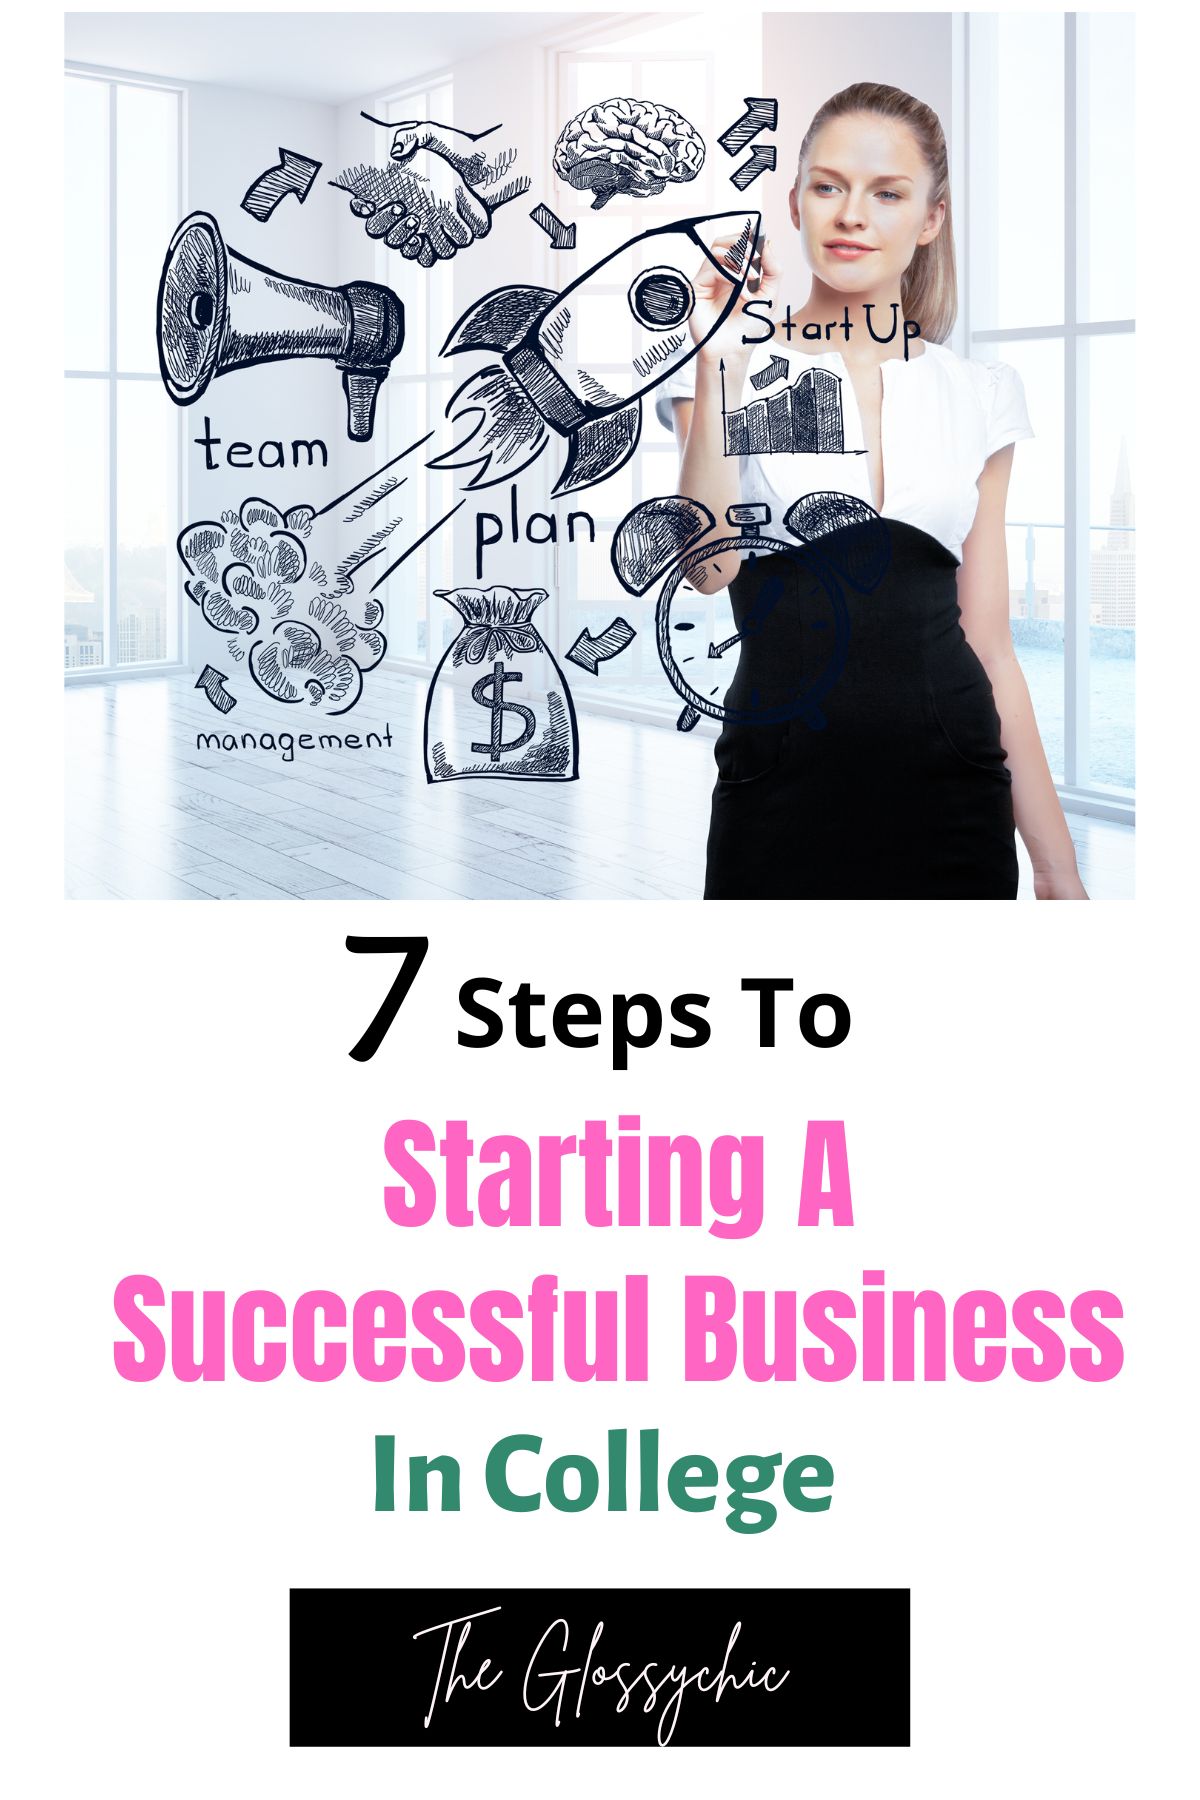 7 Steps To Starting A Successful Business In College